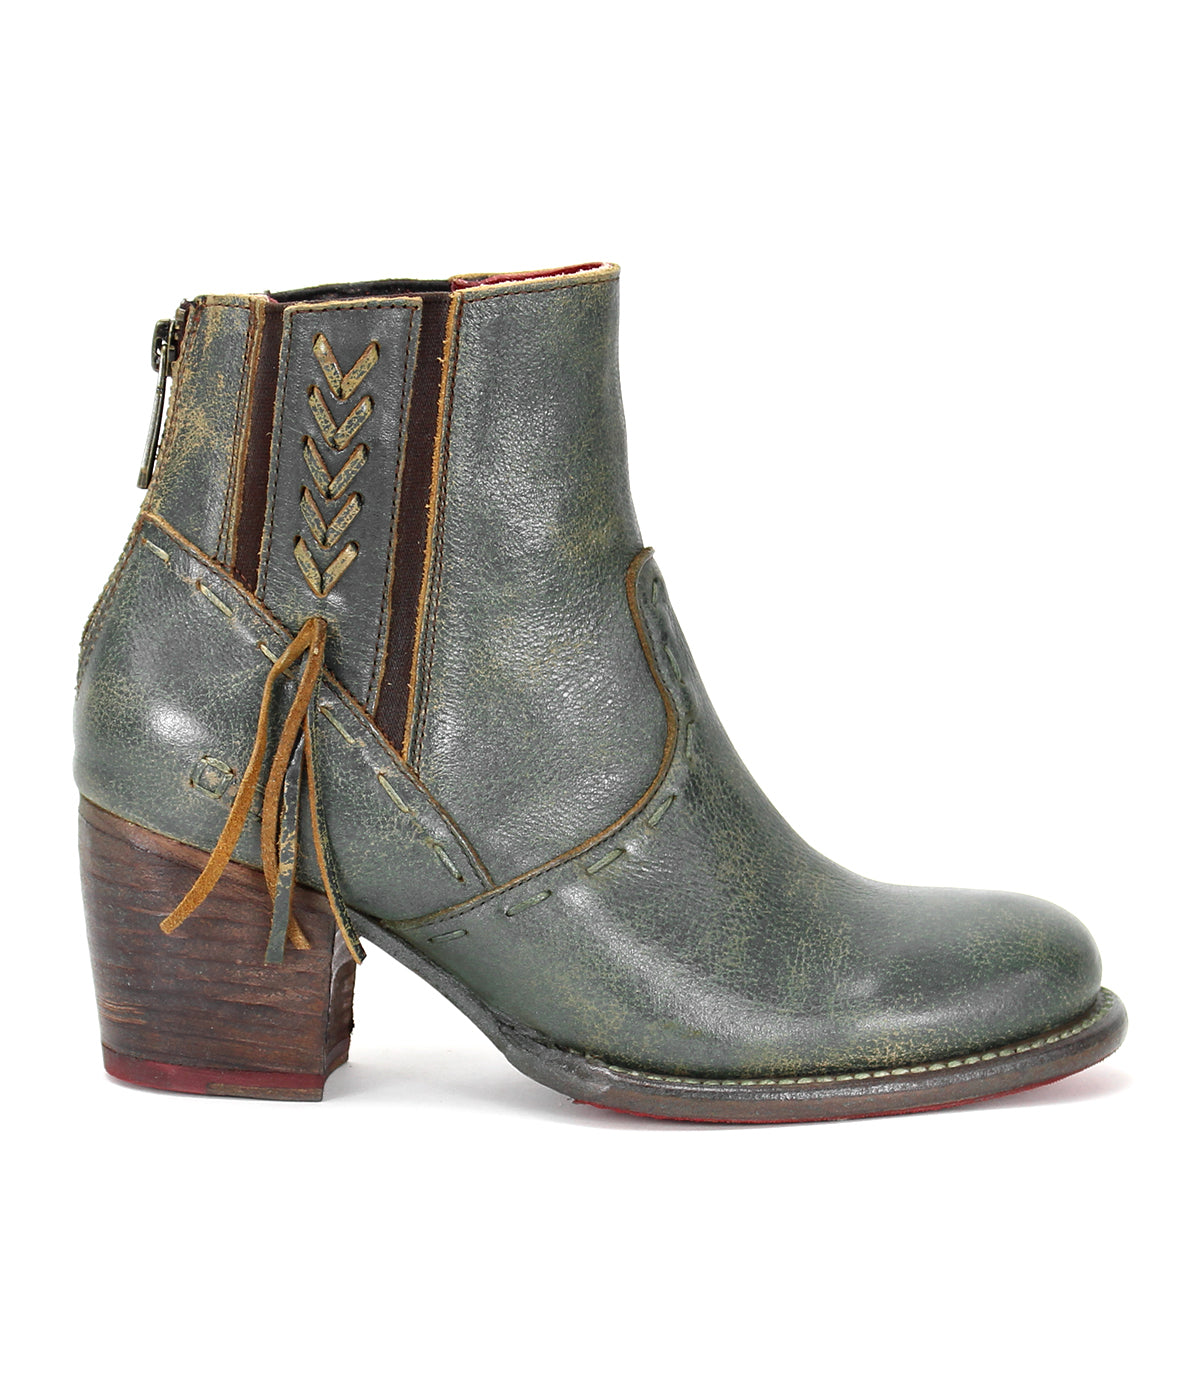 A women's Celestine green leather ankle boot with tassels by Bed Stu.